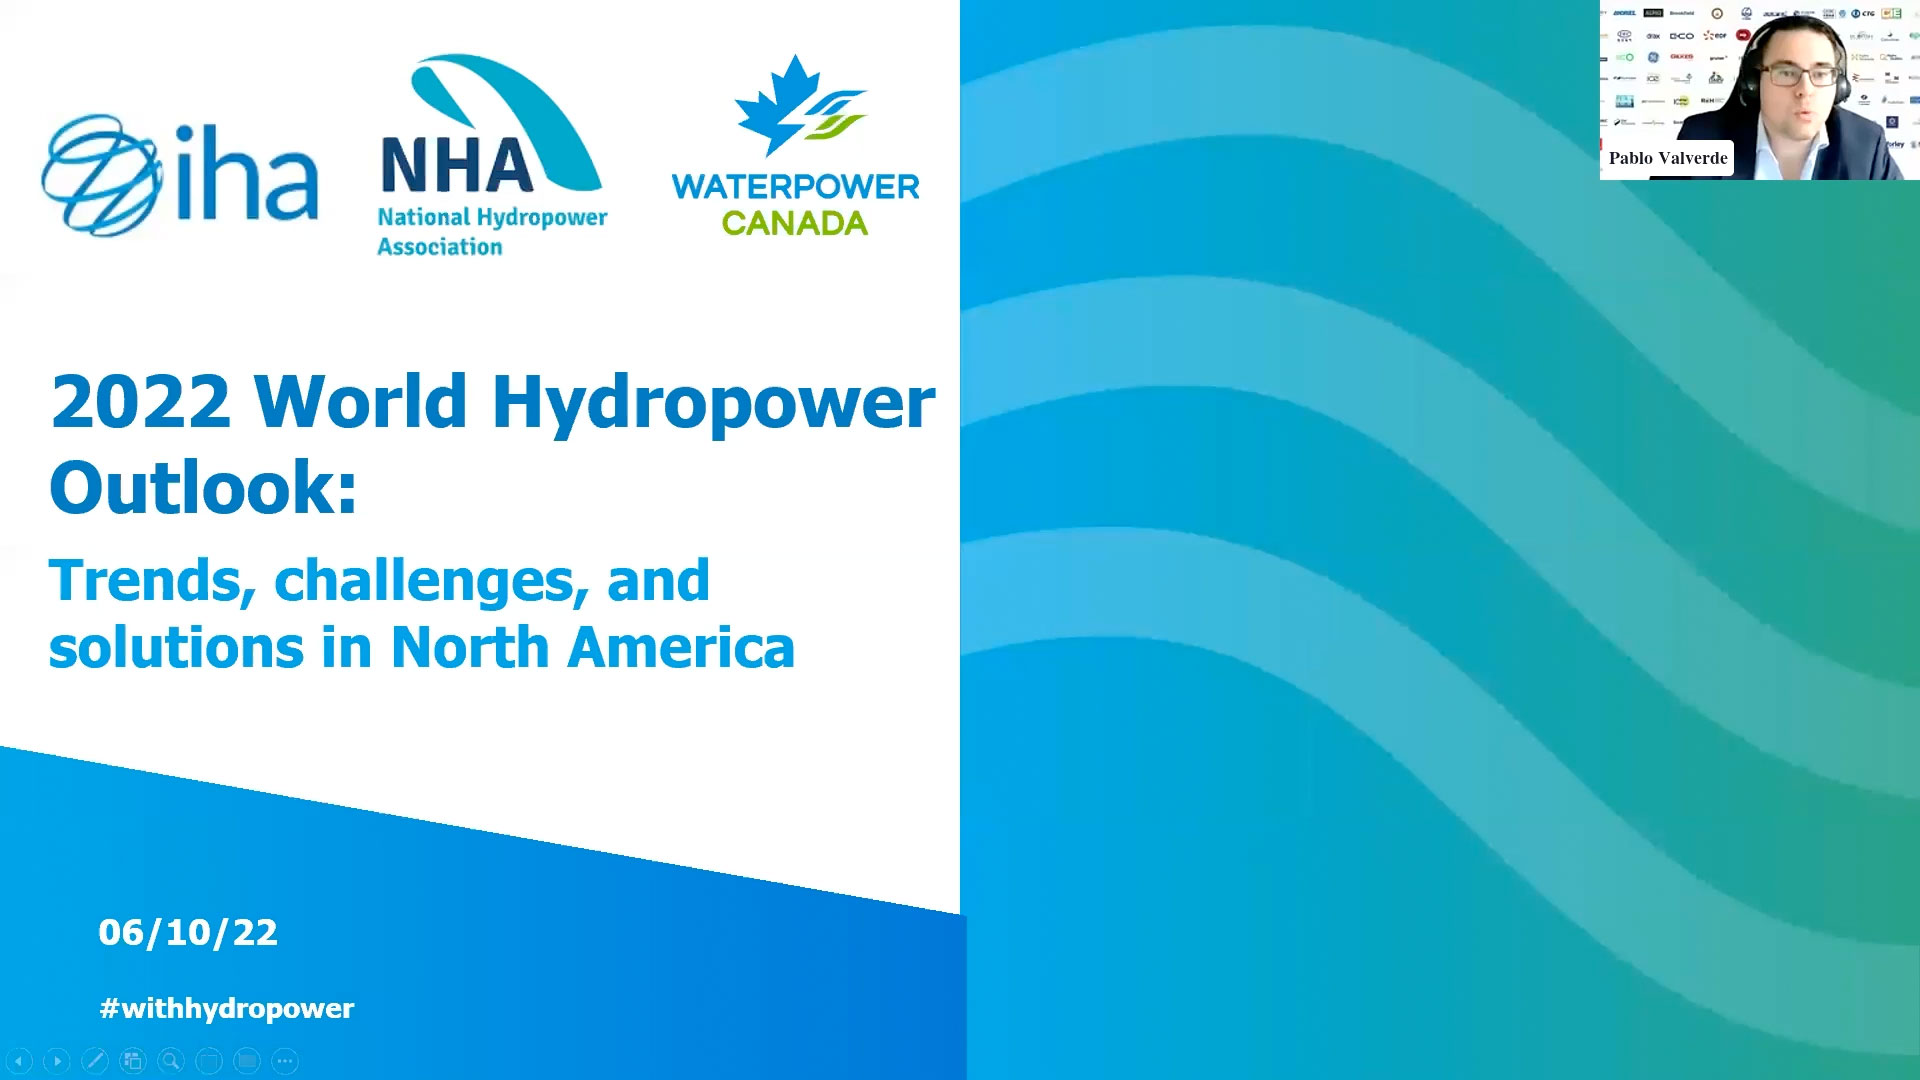 2022 World Hydropower Outlook: Trends, challenges and solutions in North America